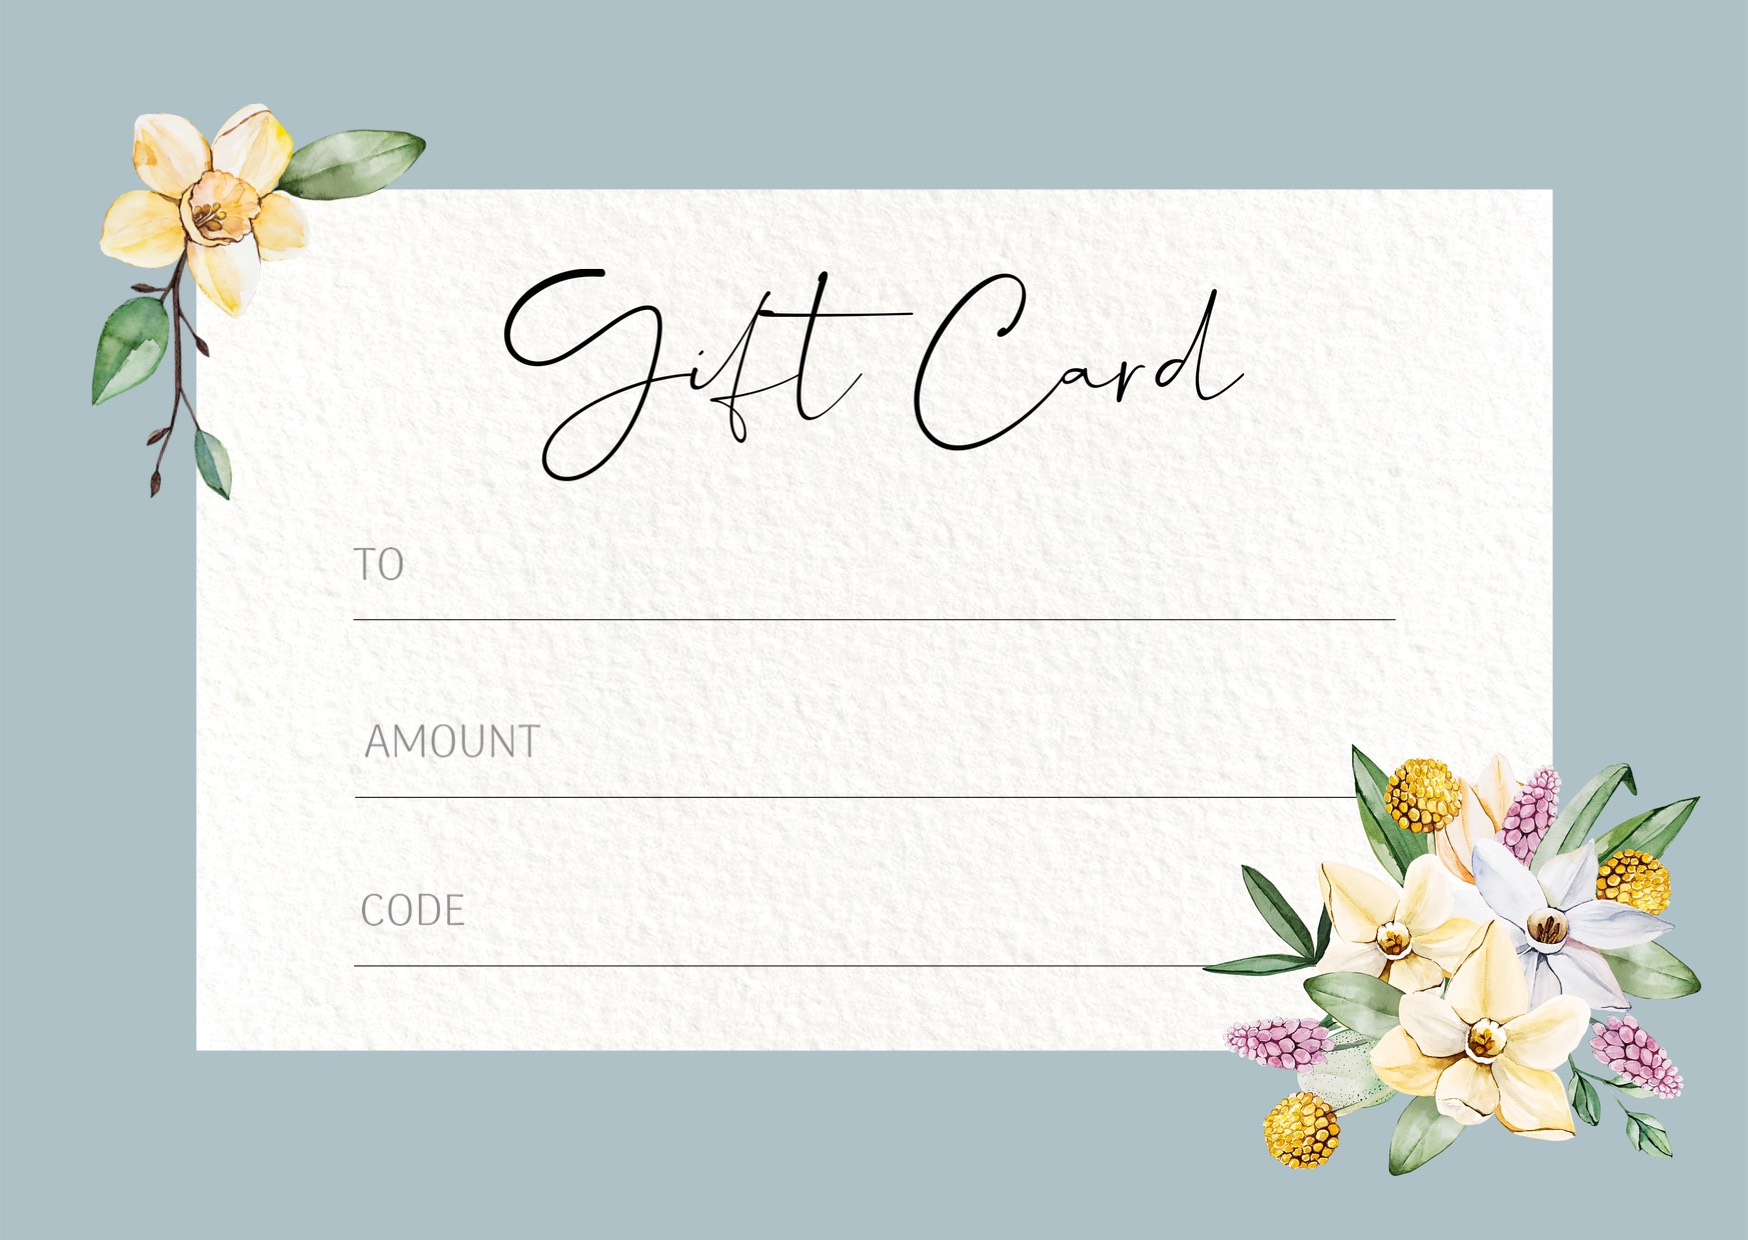 gift card voucher floral template 